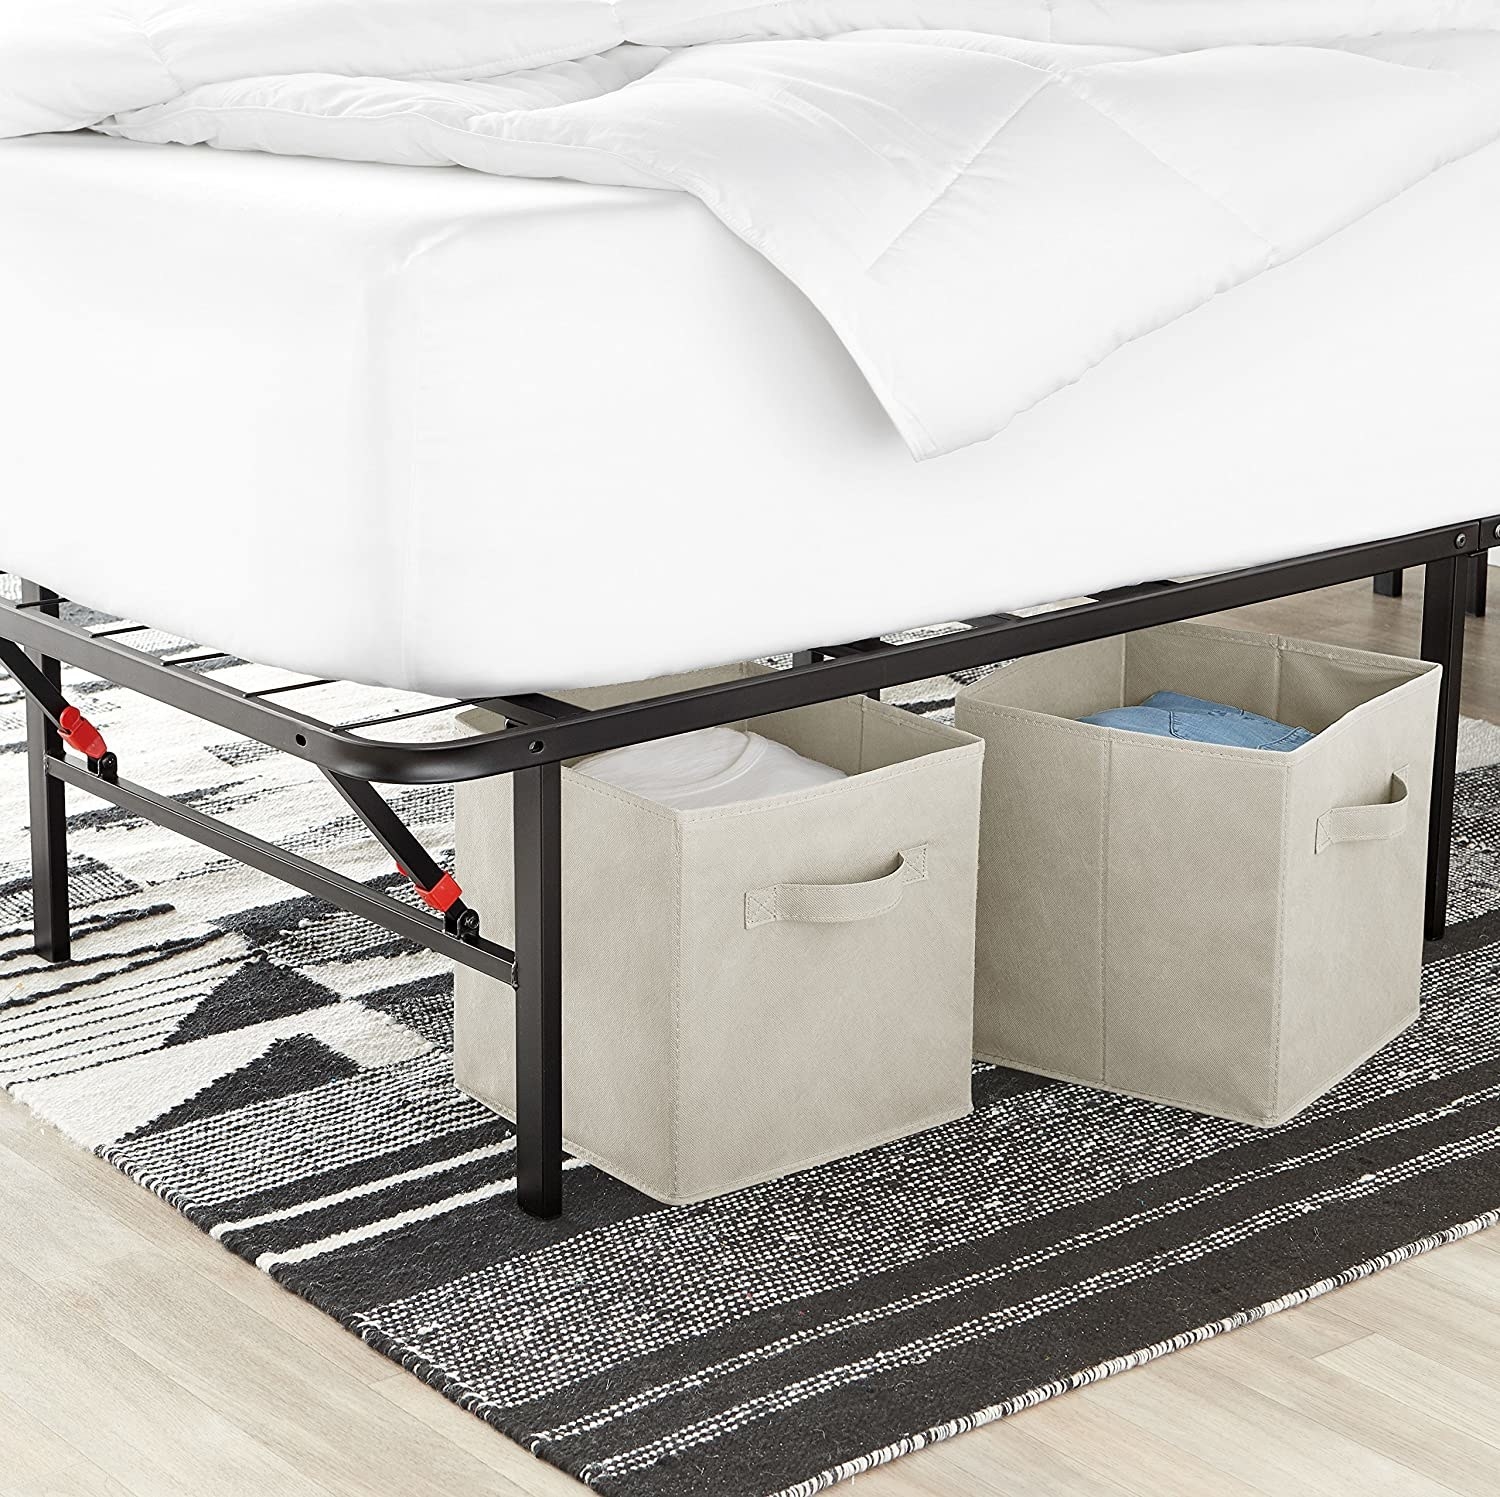 Storage cubes placed under a bed.